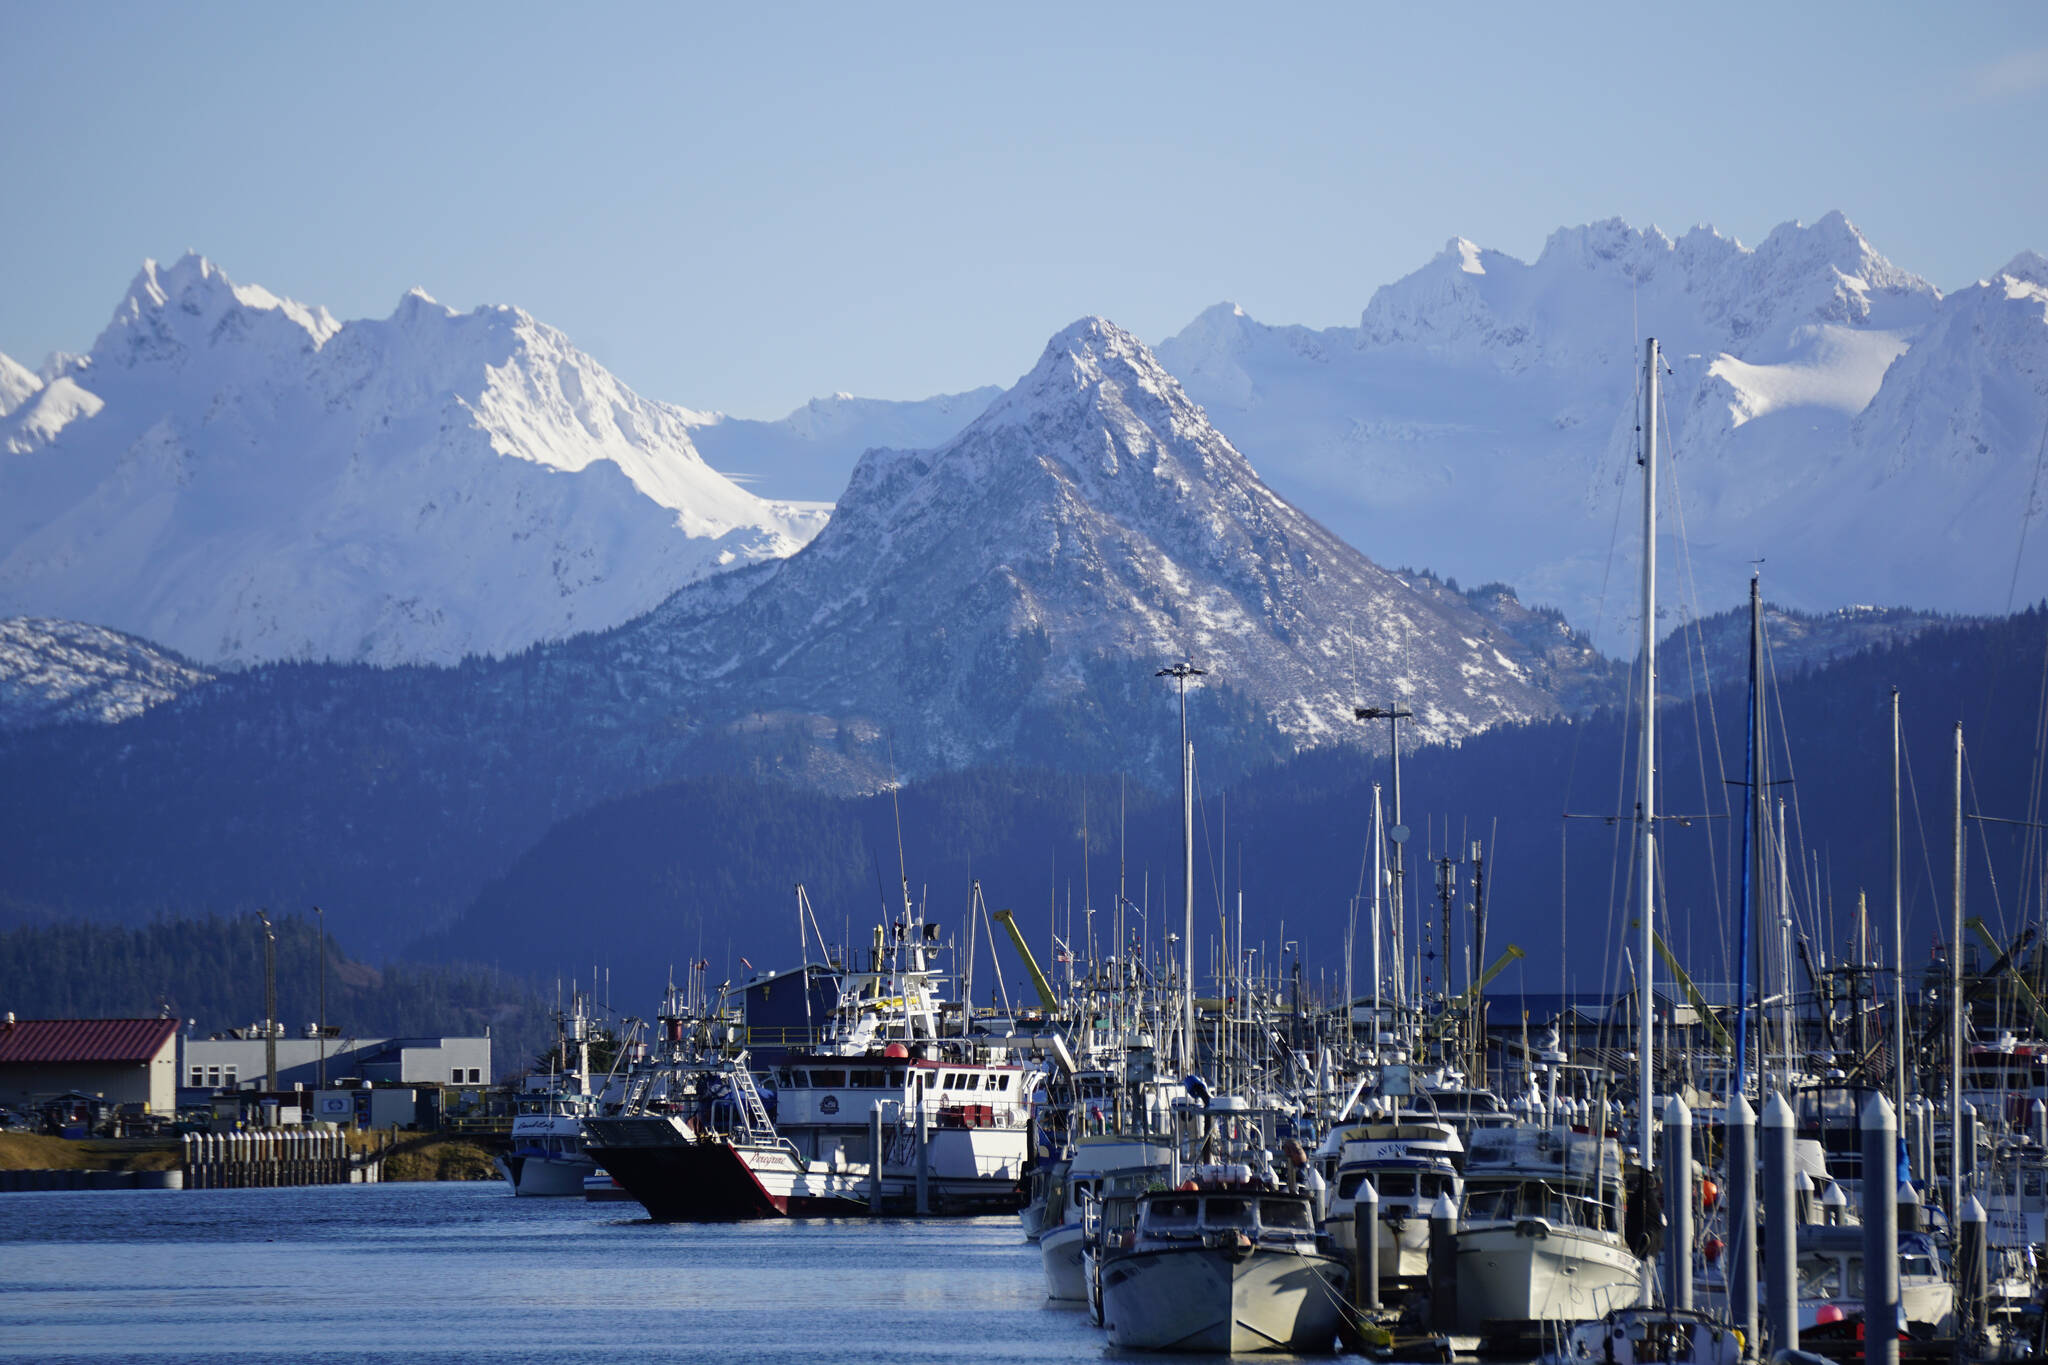 Snow has fallen on the higher elevations of Poot Peak and the Kenai Mountains, as seen from the Homer Harbor on Friday, Nov. 5, 2021, in Homer, Alaska. The snow also makes visible the image of the bear on the side of Poot Peak. Poot Peak and China Poot Bay were named for Henry “China” Poot. According to Janet Klein’s “A History of Kachemak Bay,” she wrote that Clem Tillion said Poot was an Alaska Native of mixed heritage who associated with Chinese workers in the area who packed salmon. Poot’s nickname was “China.” (Photo by Michael Armstrong/Homer News)